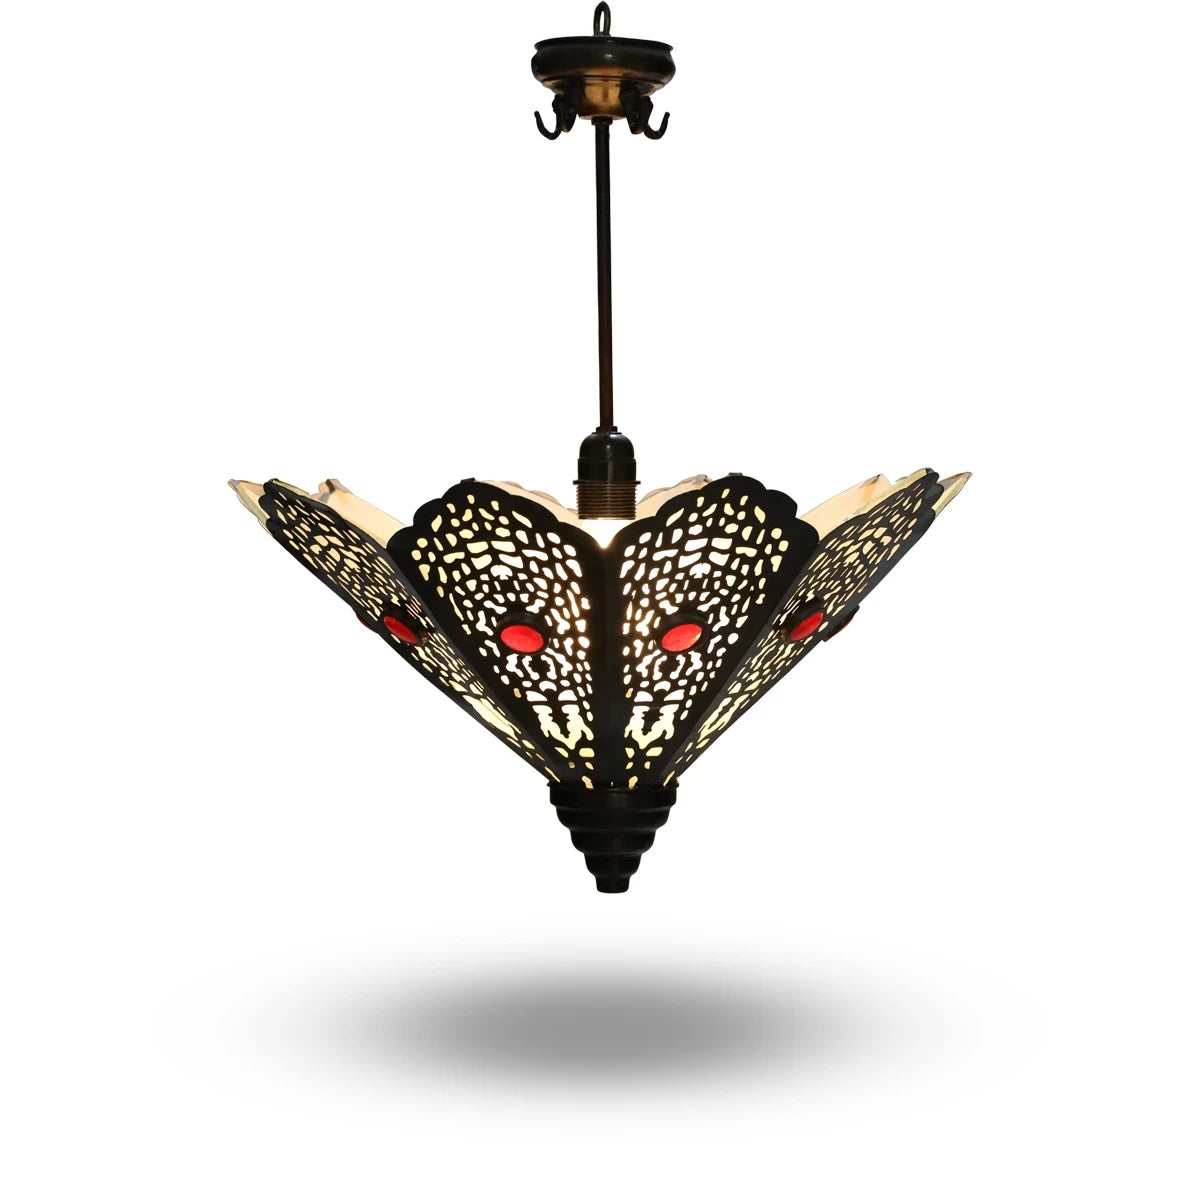 Hanging View of Moroccan Pendant lamp with Bulbs On